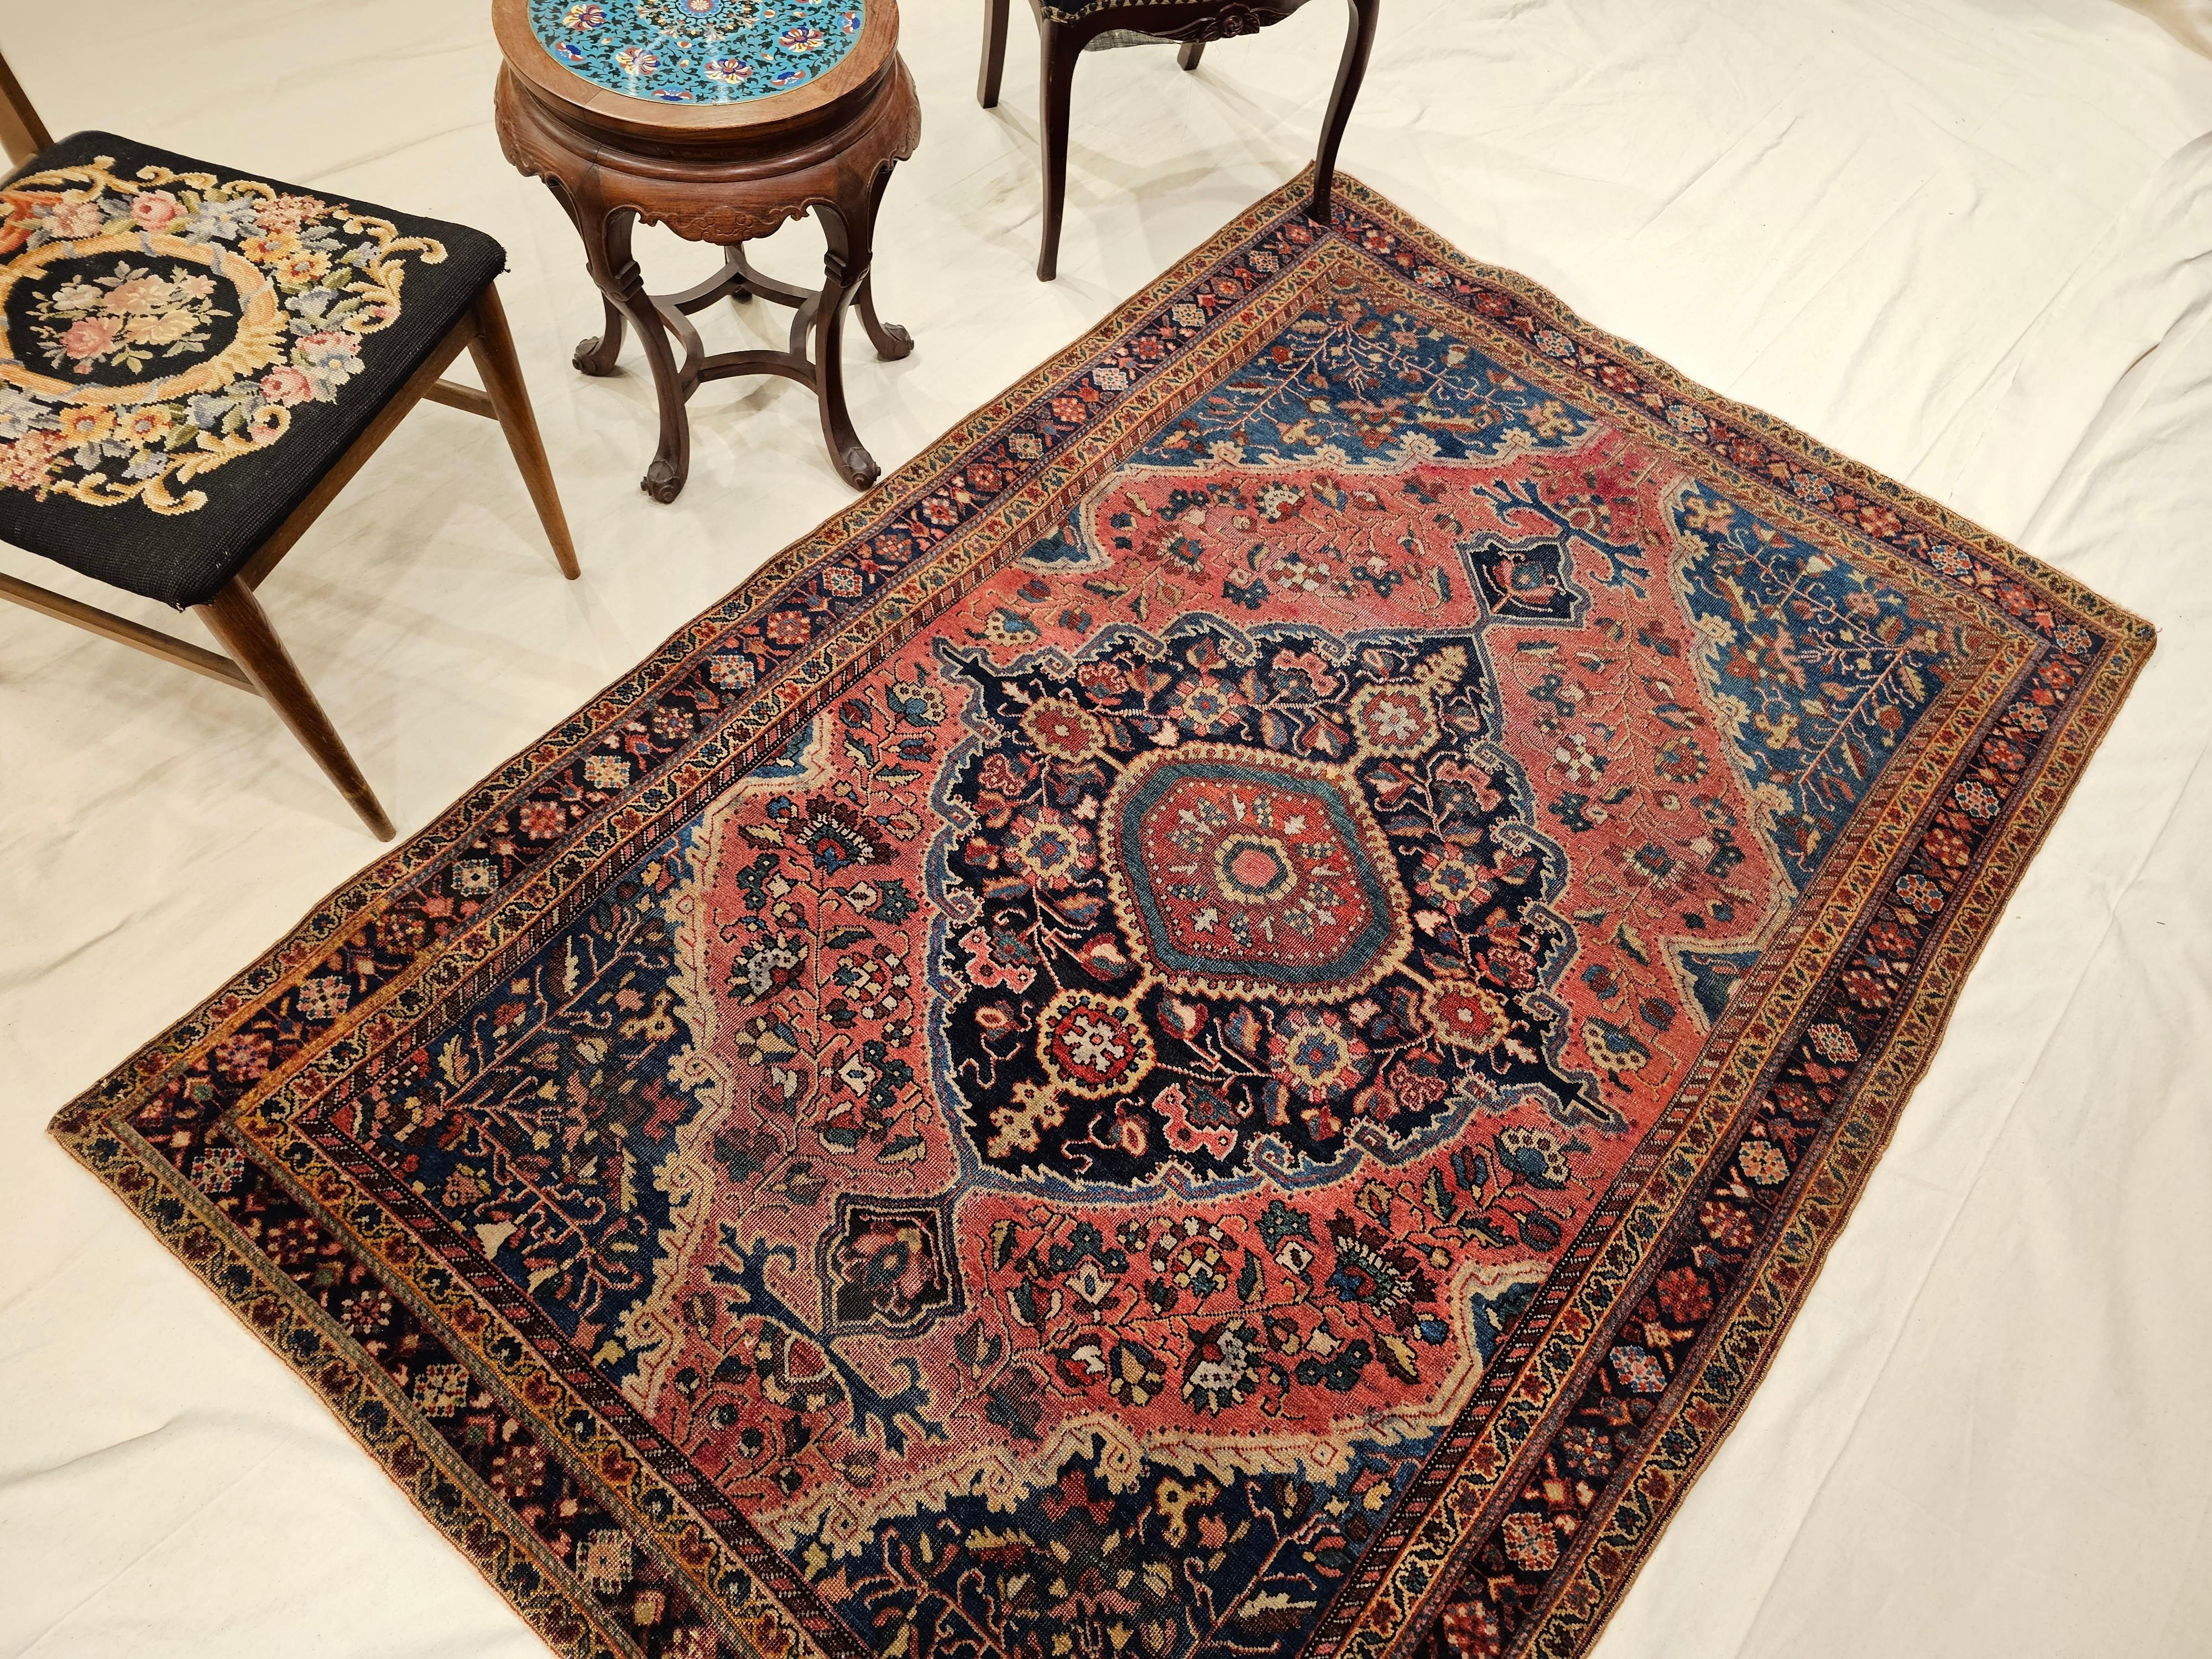 19th Century Persian Farahan Sarouk Area Rug in Rust Red, French Blue, Navy Blue For Sale 5